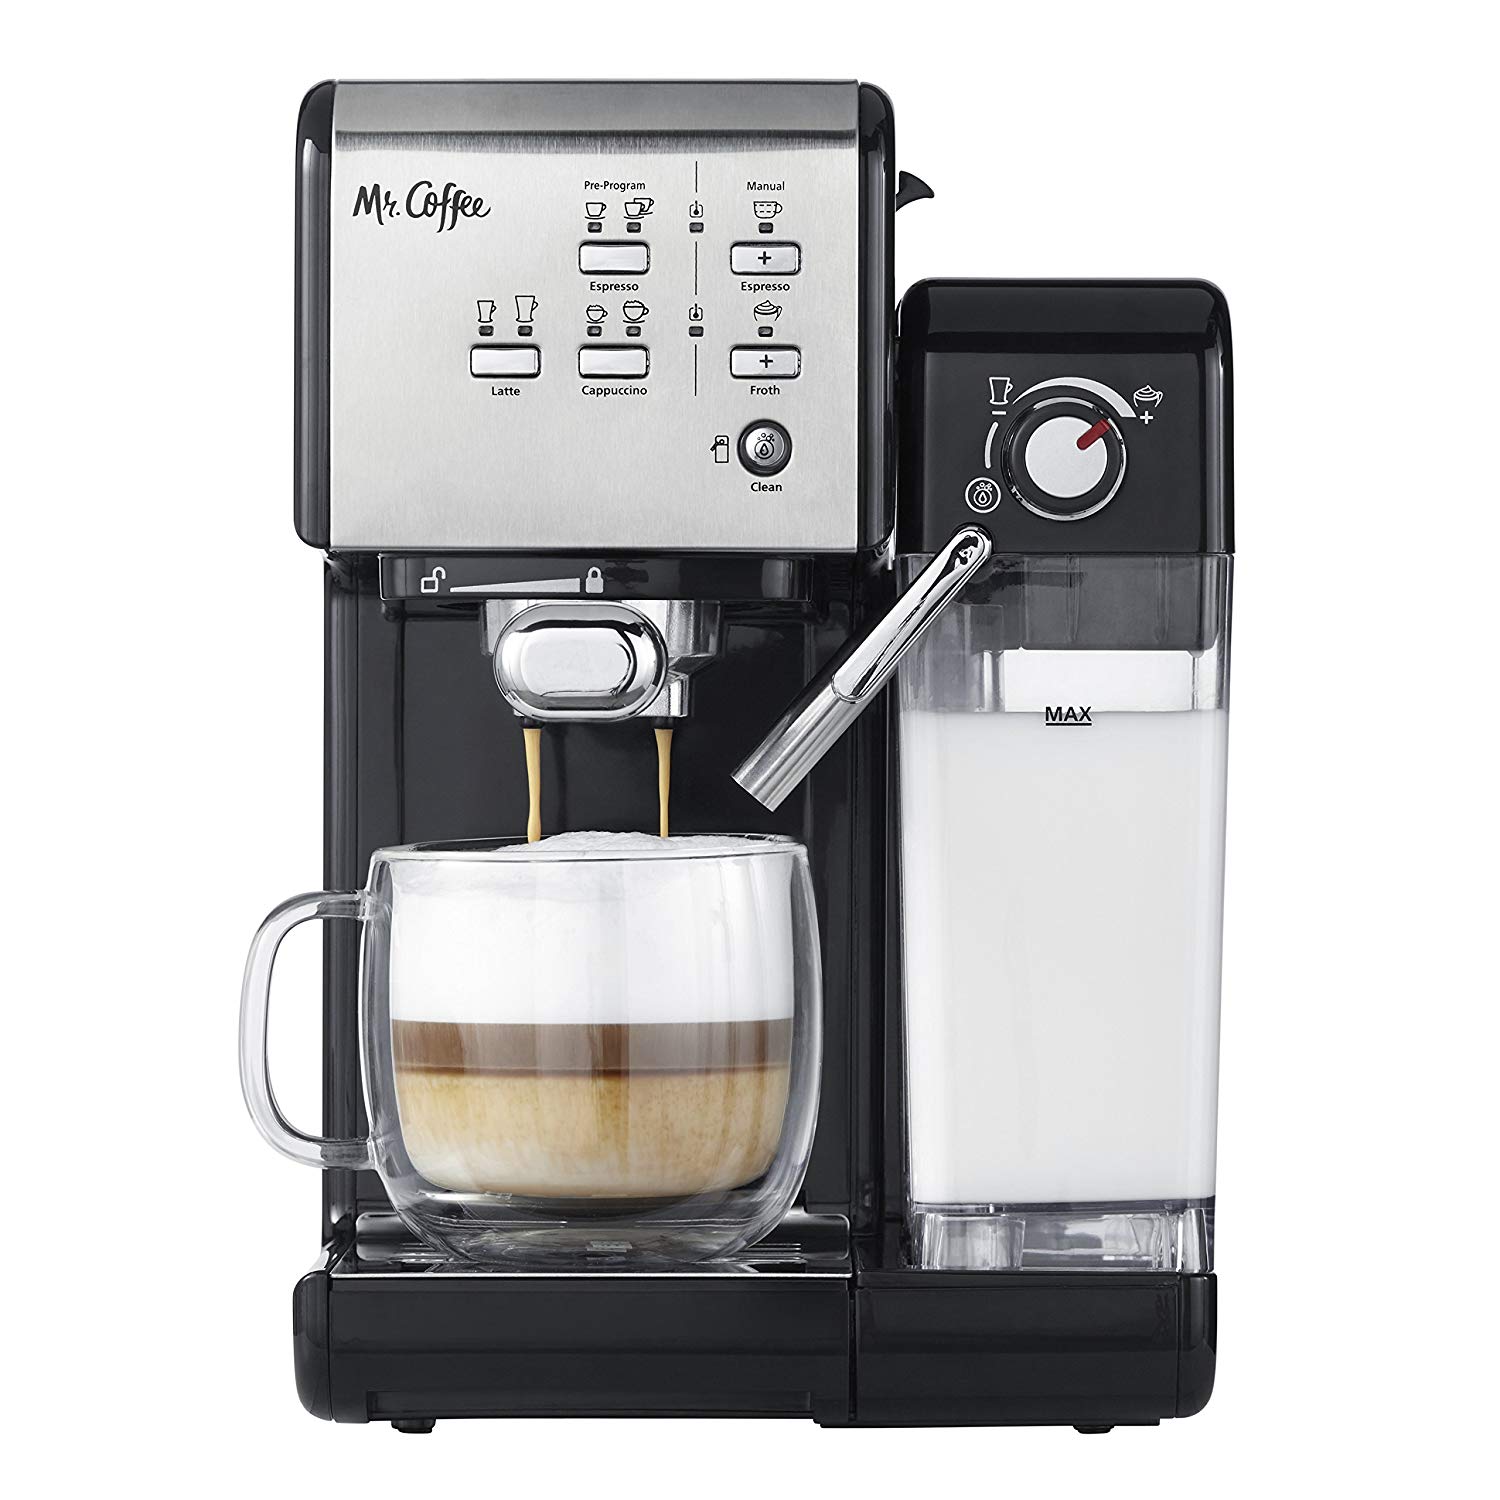 Mr. Coffee One-Touch CoffeeHouse Espresso Maker 